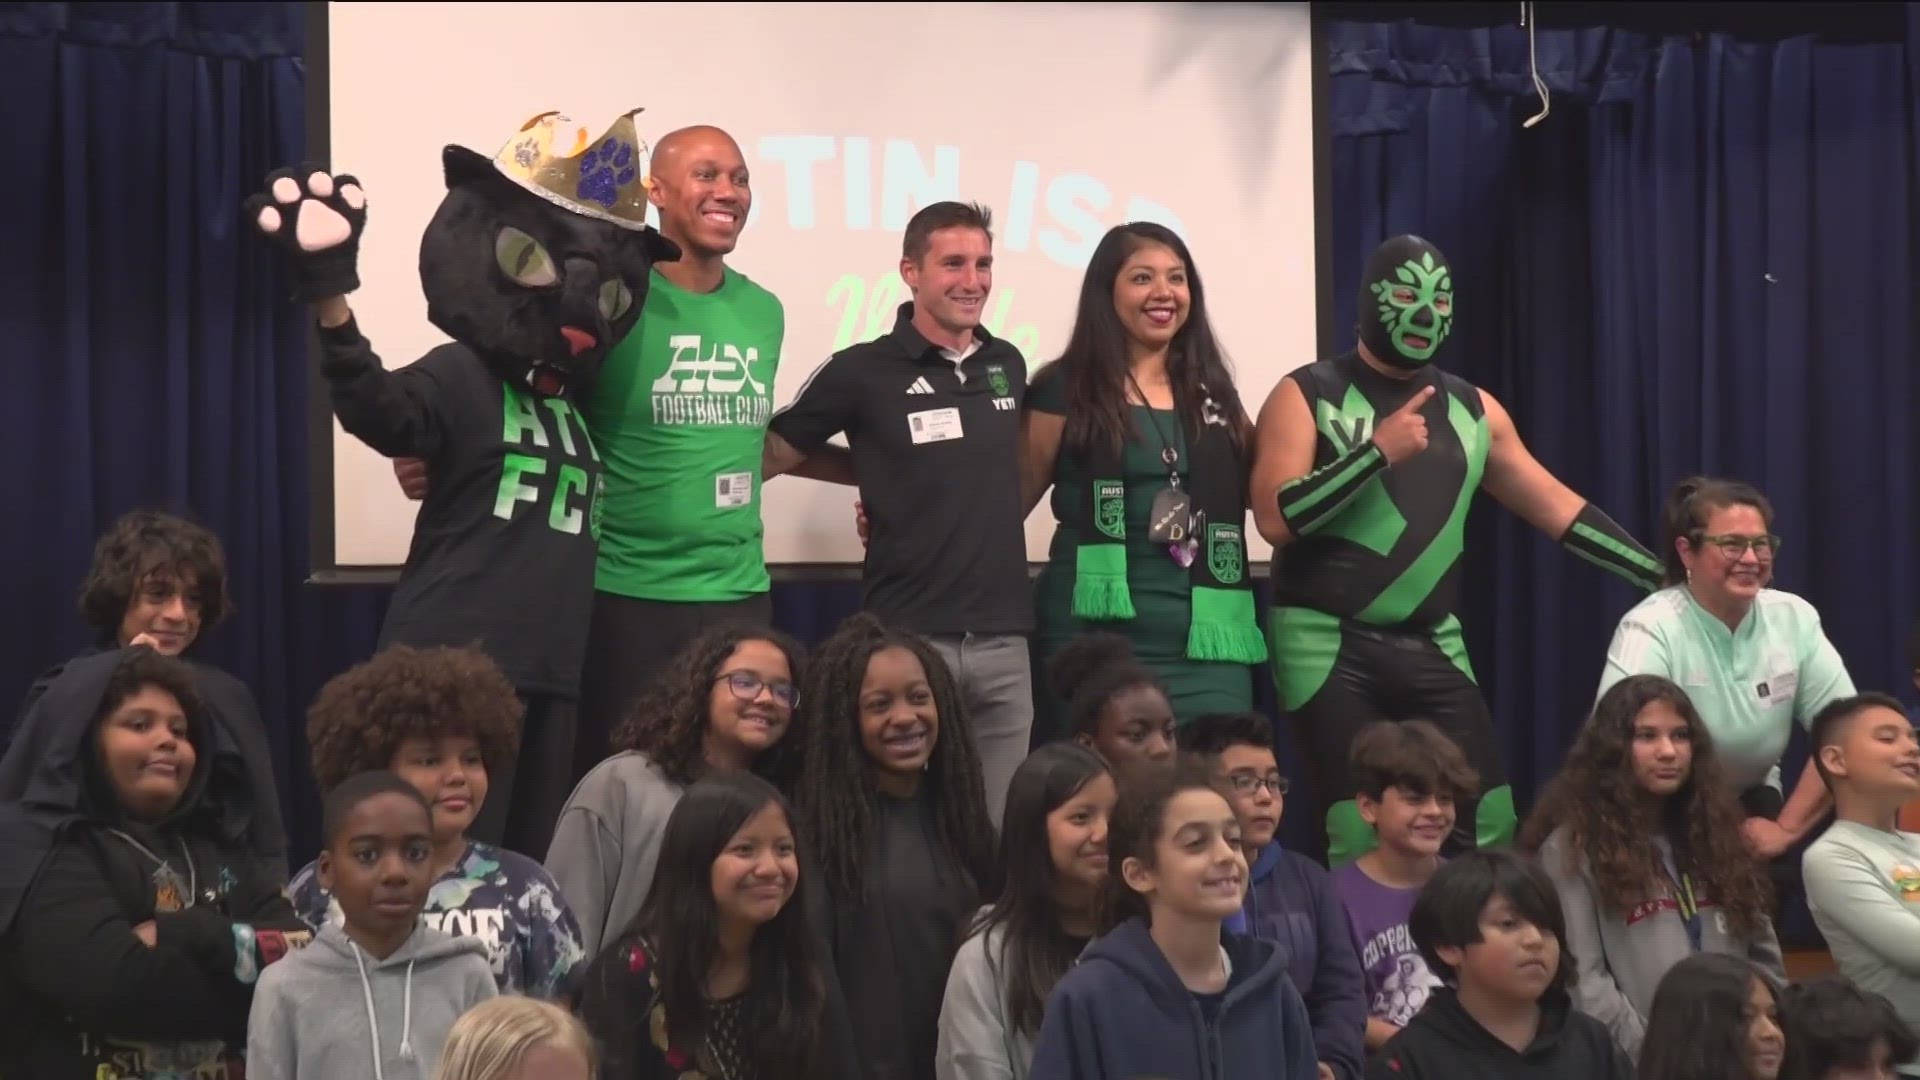 Austin FC's Ethan Finaly went to a local elementary school to describe the importance of reading and his favorite food - pizza!